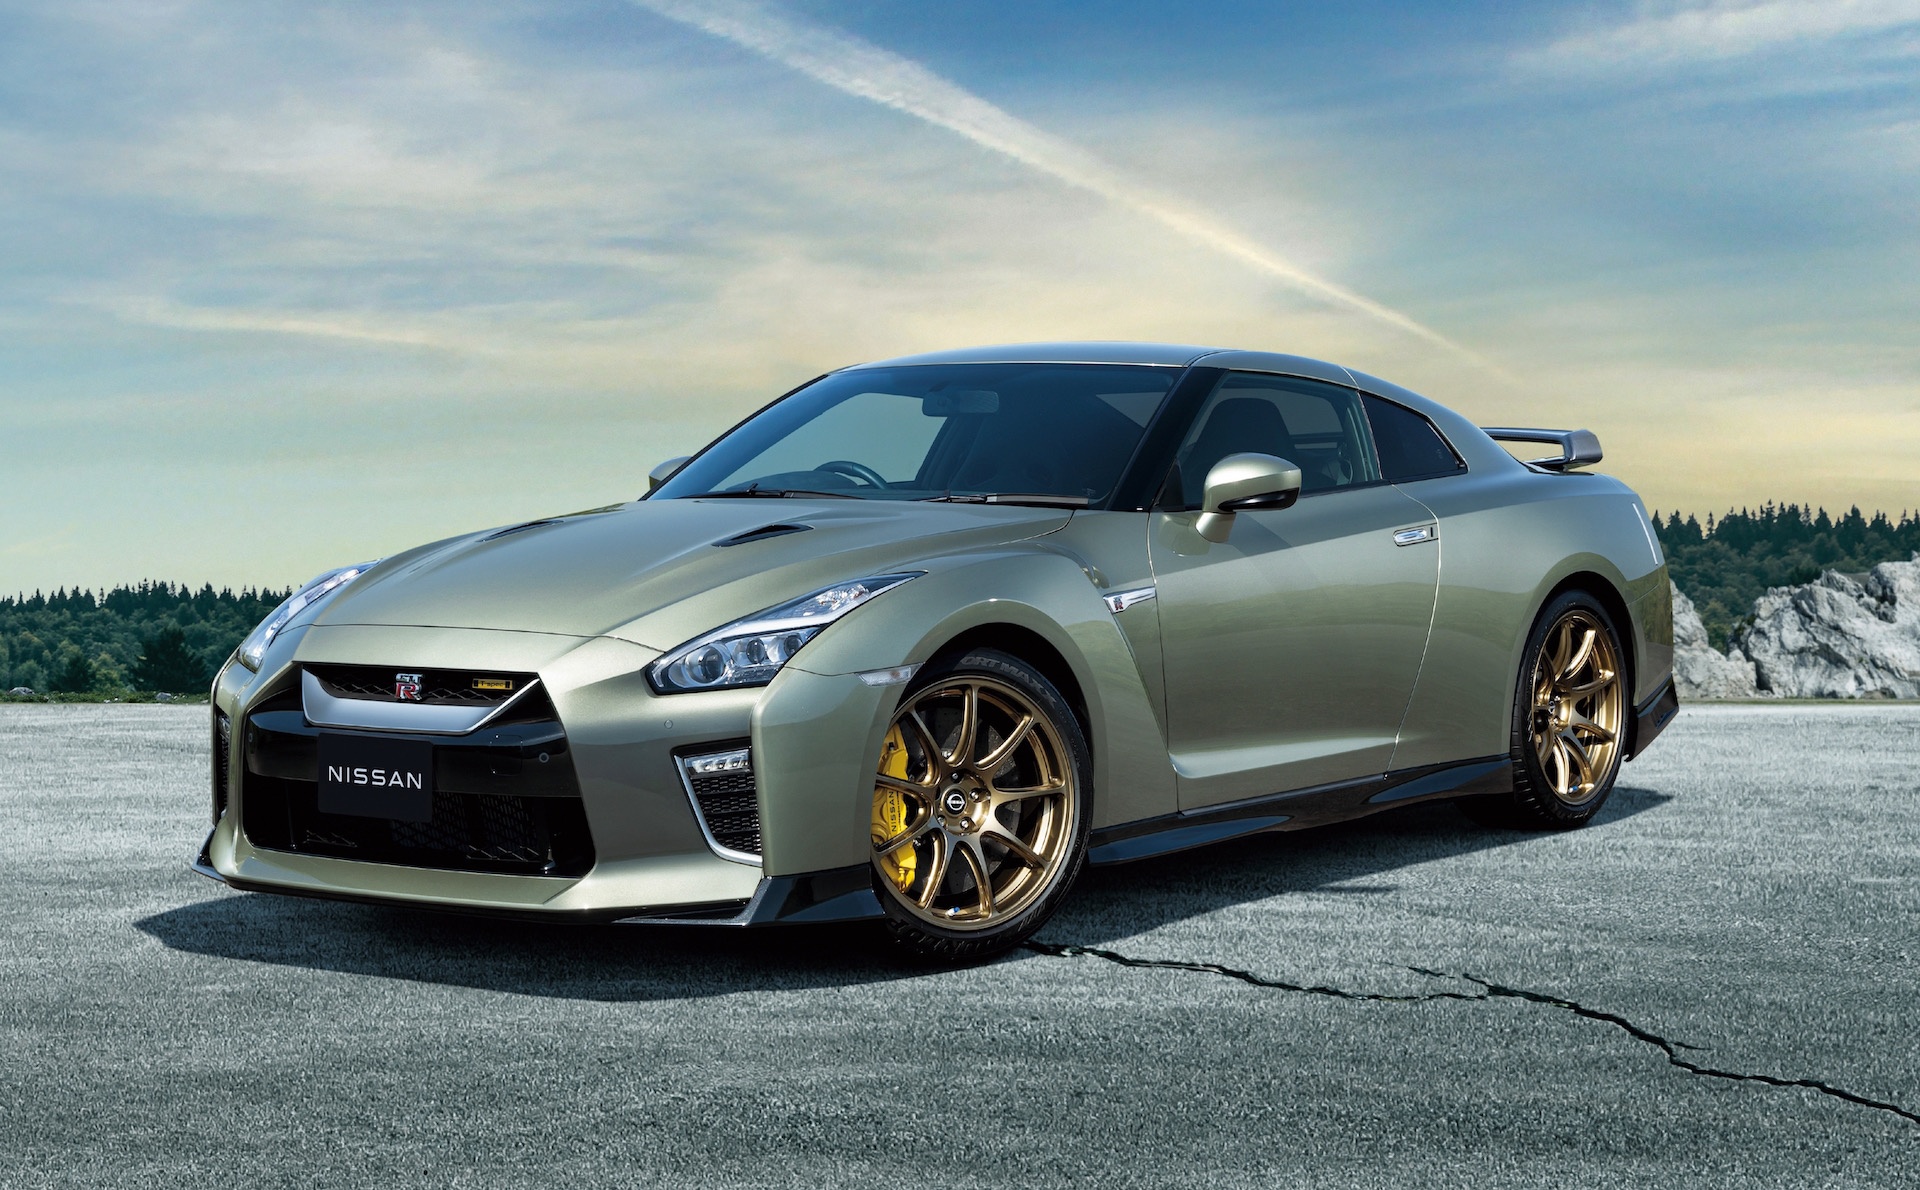 Nissan R35 GT-R being discontinued in Australia, 2022 update debuts for Japan